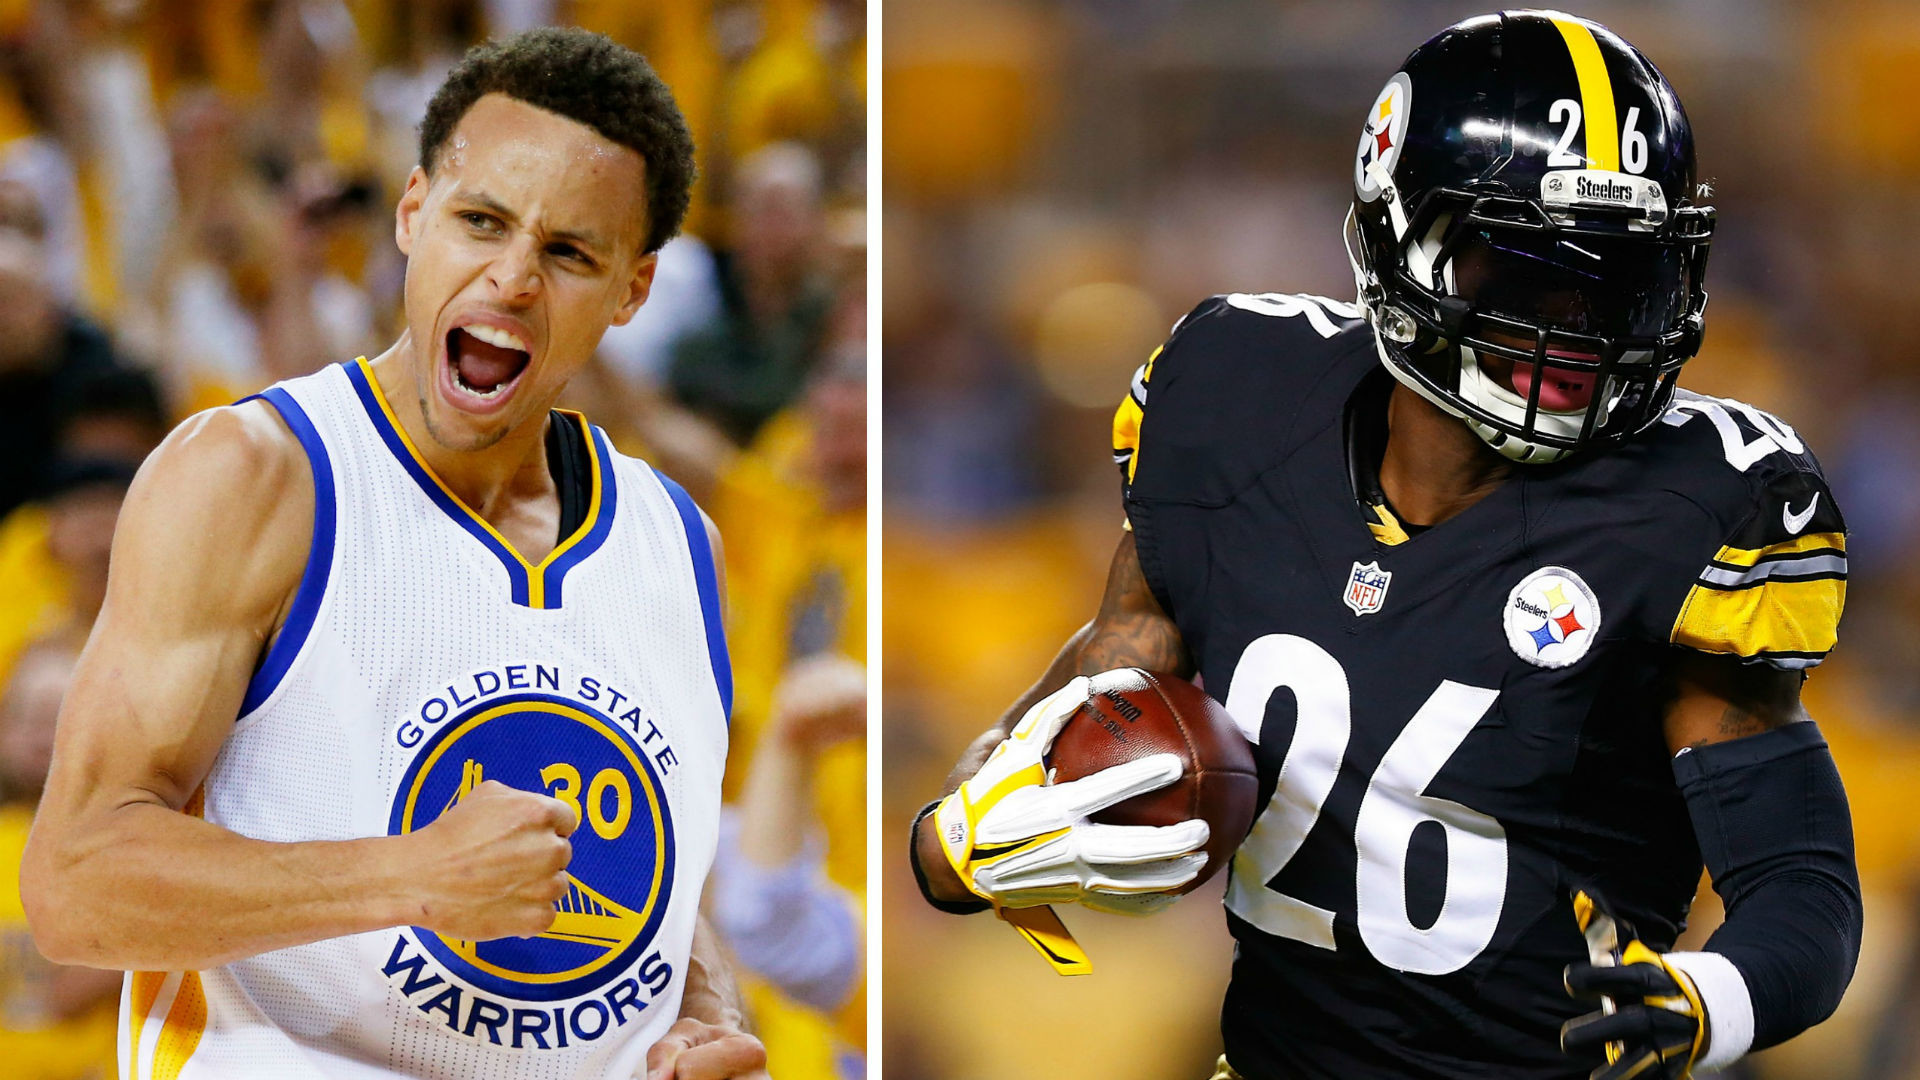 Le'Veon Bell, like Stephen Curry, is much more anomaly than trail blazer |  NFL | Sporting News